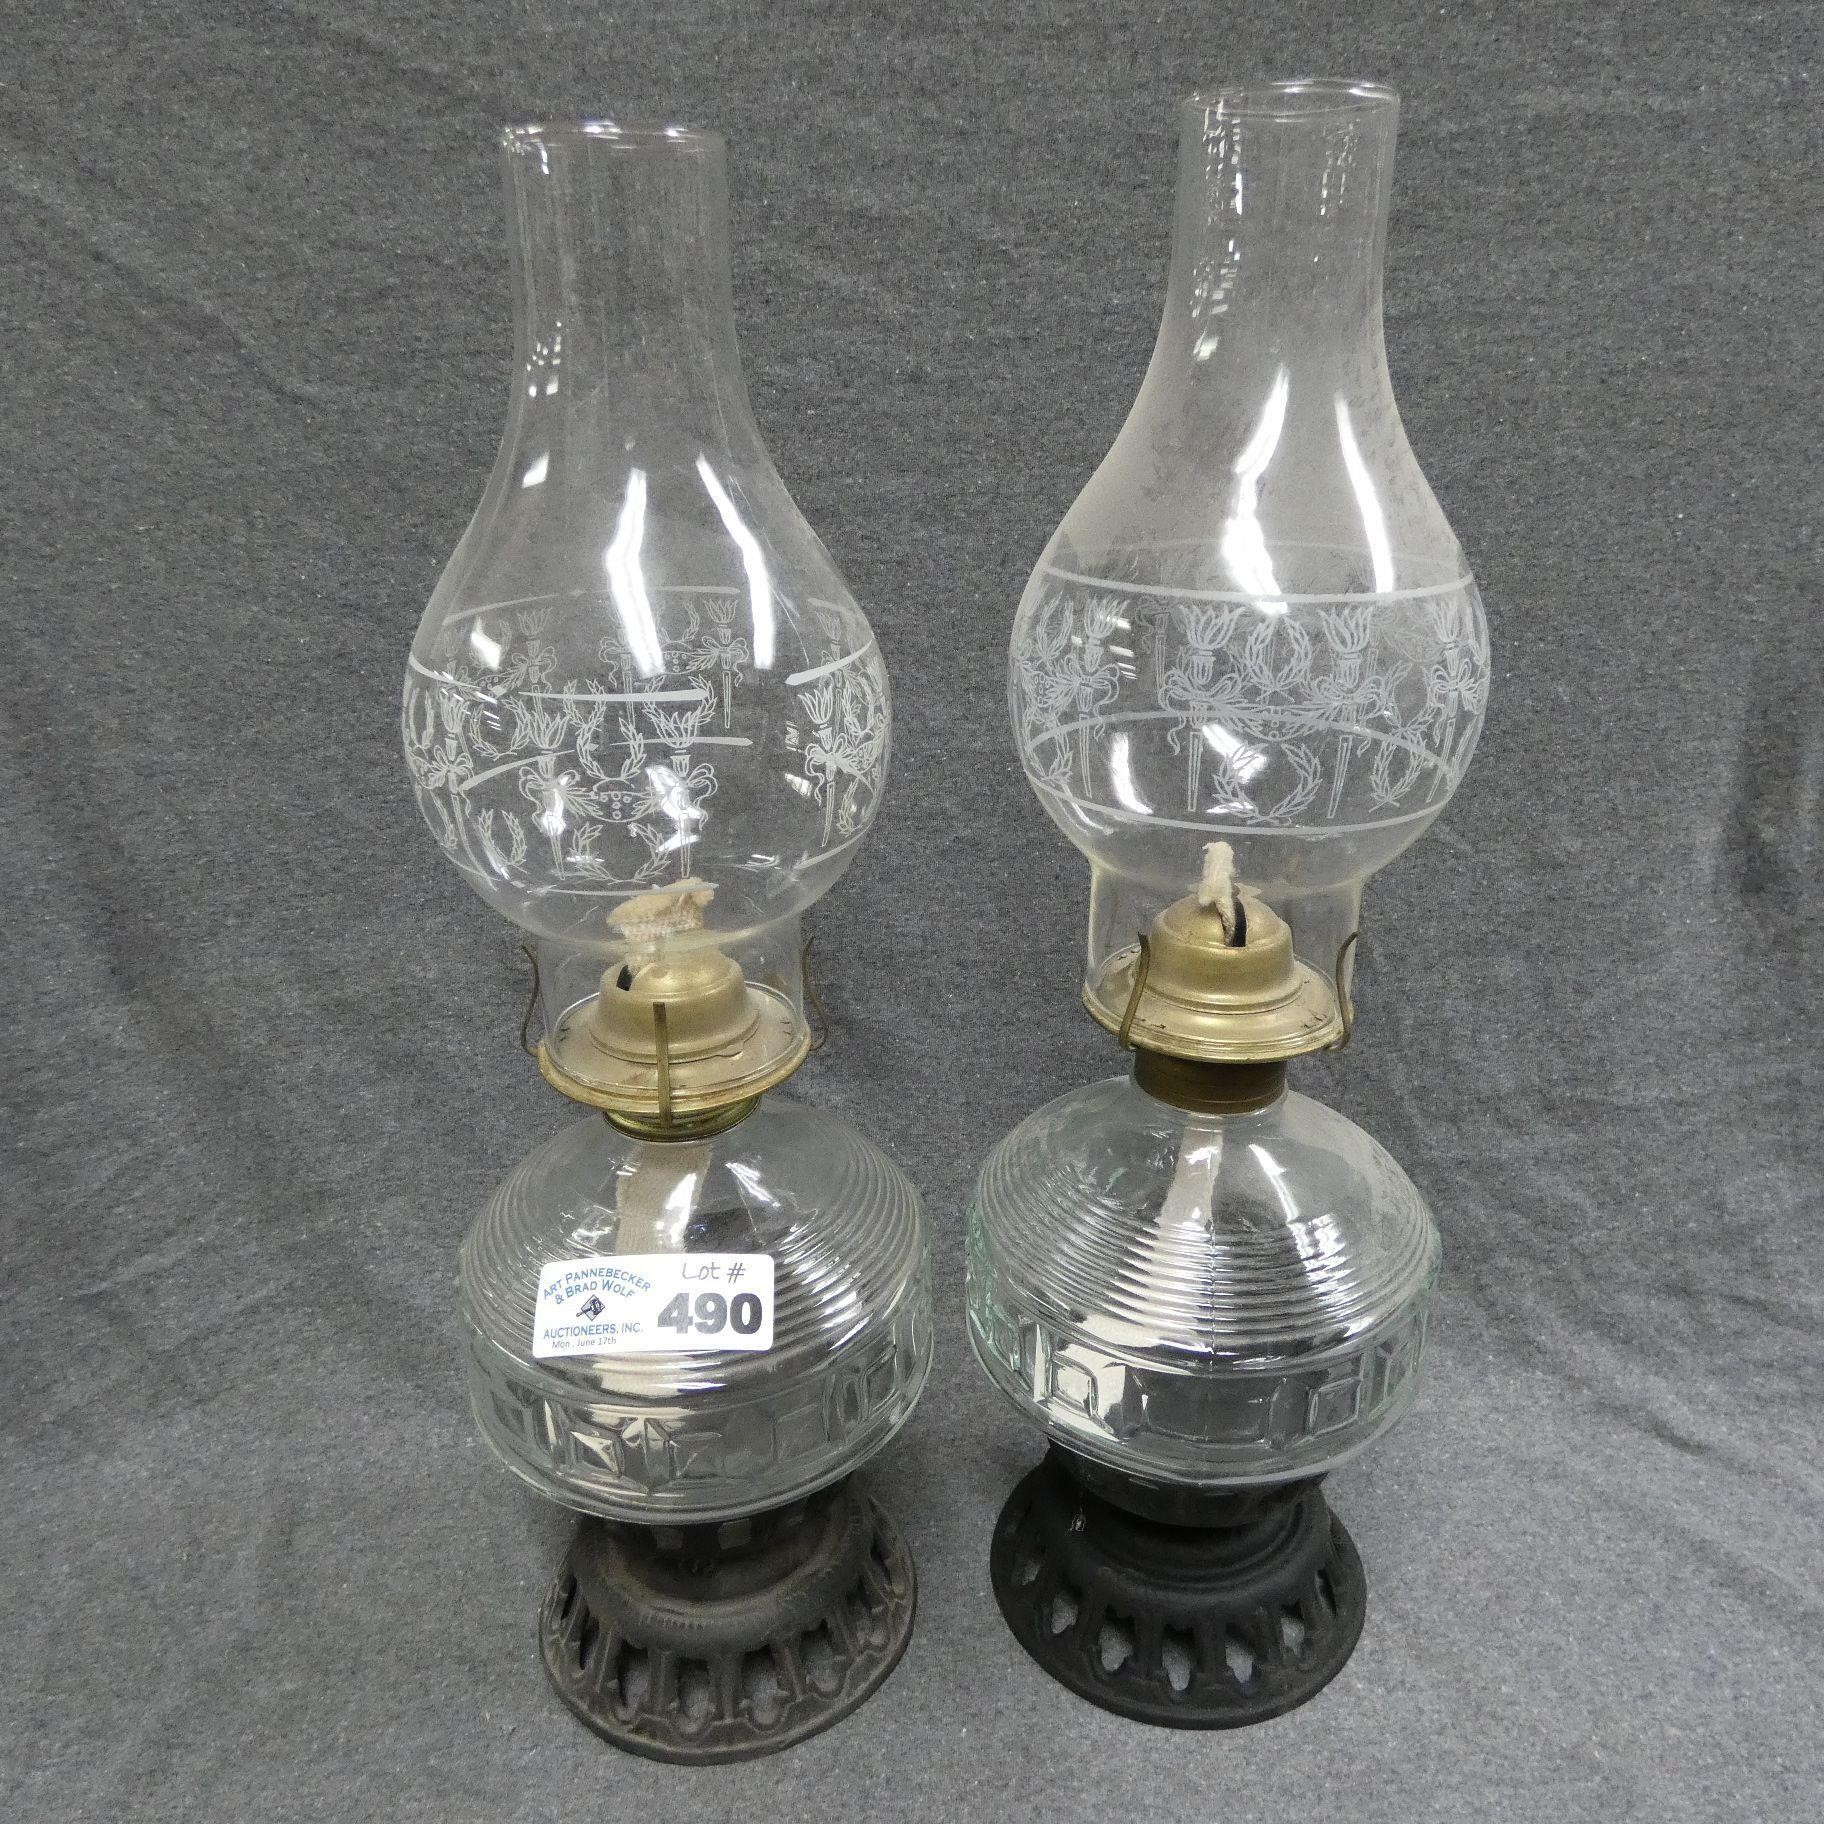 Pair of Glass Oil Lamps w/ Cast Iron Bases